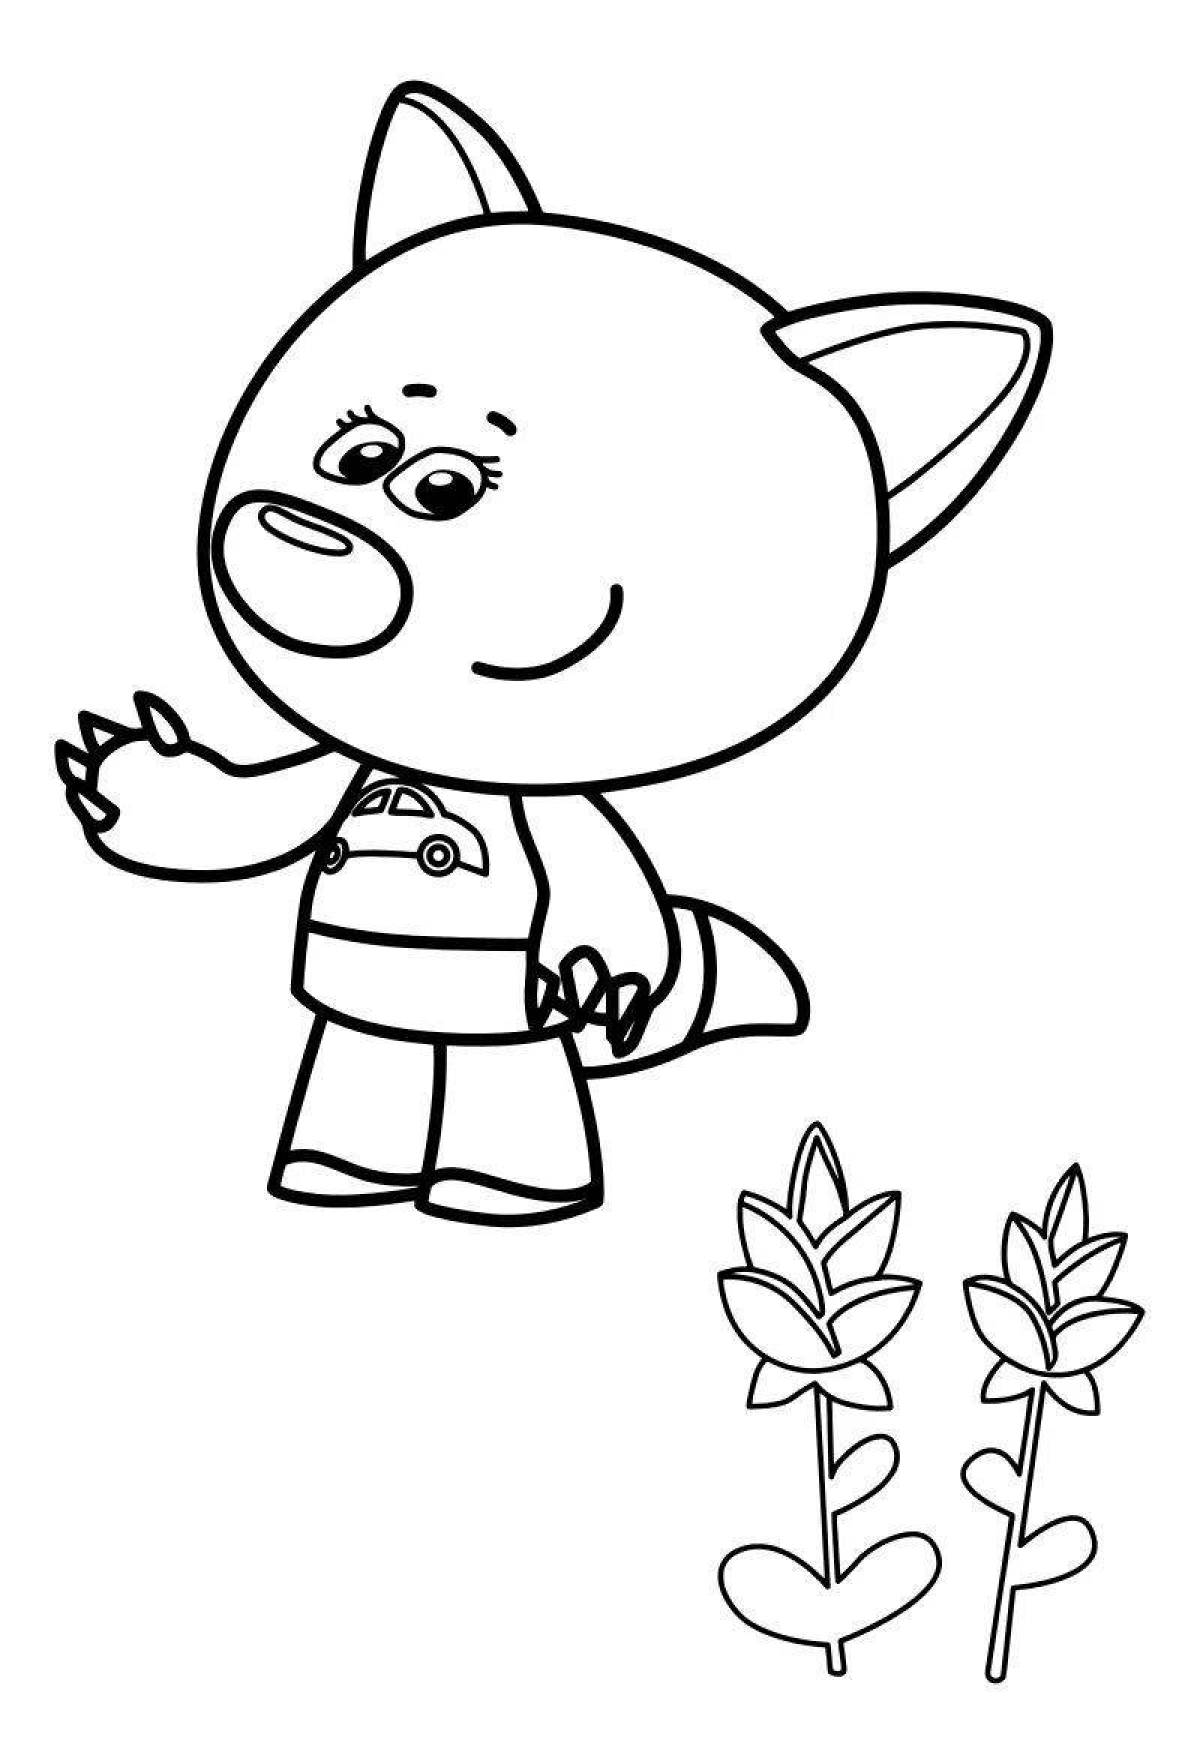 Snuggable coloring page cloud of bears